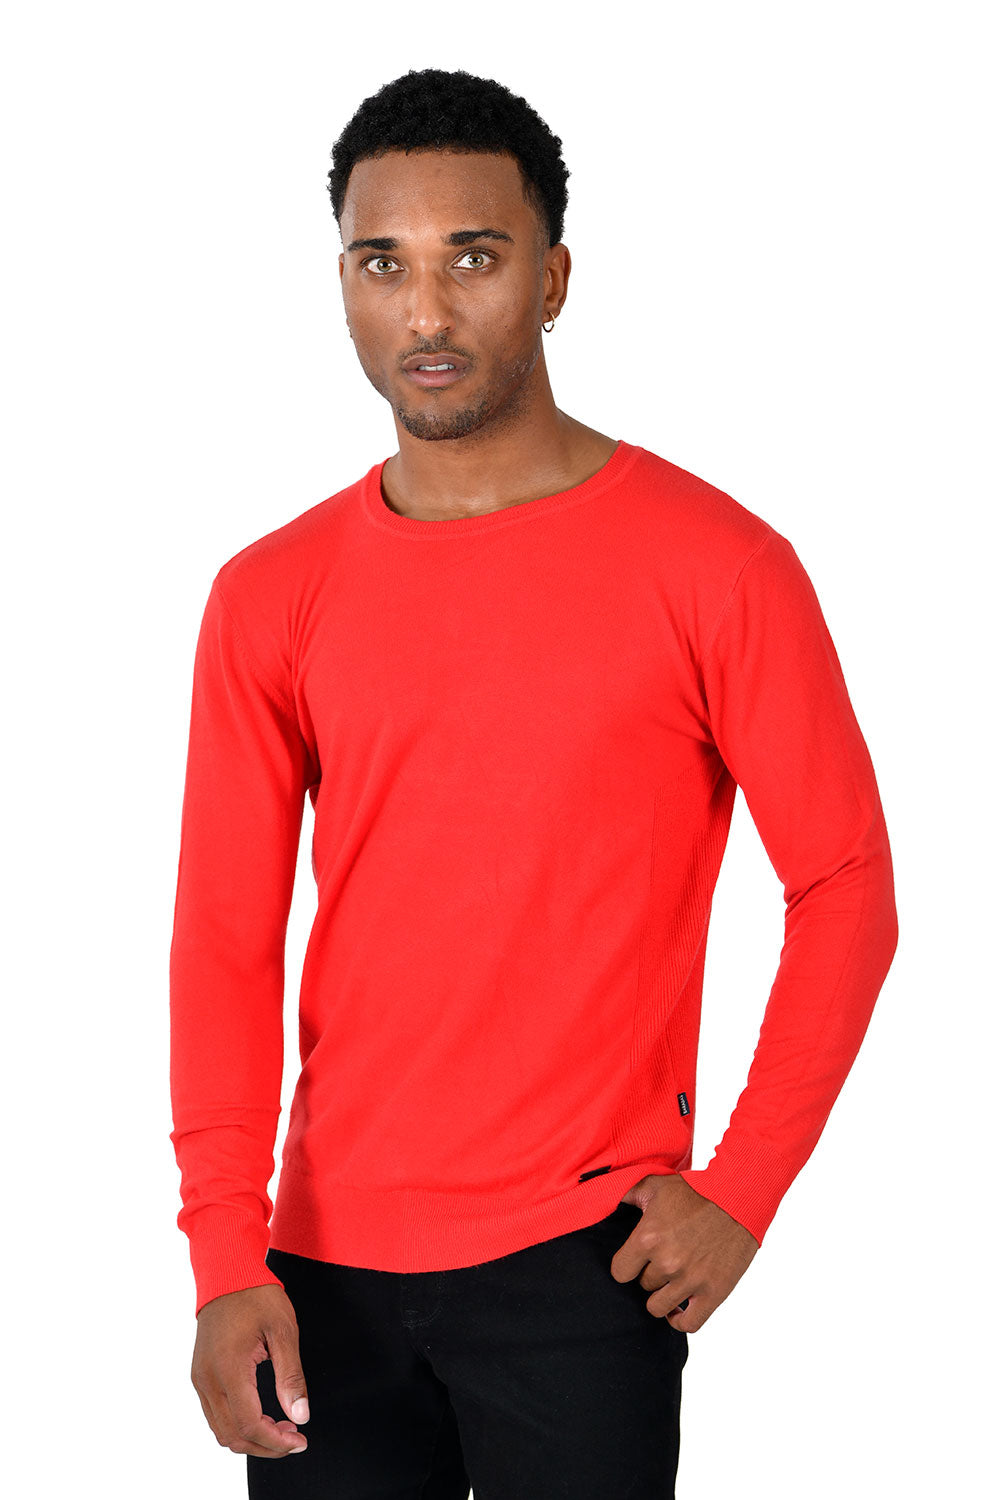 BARABAS Men's Crew Neck Ribbed Solid Color Basic Sweater LS2101 Red